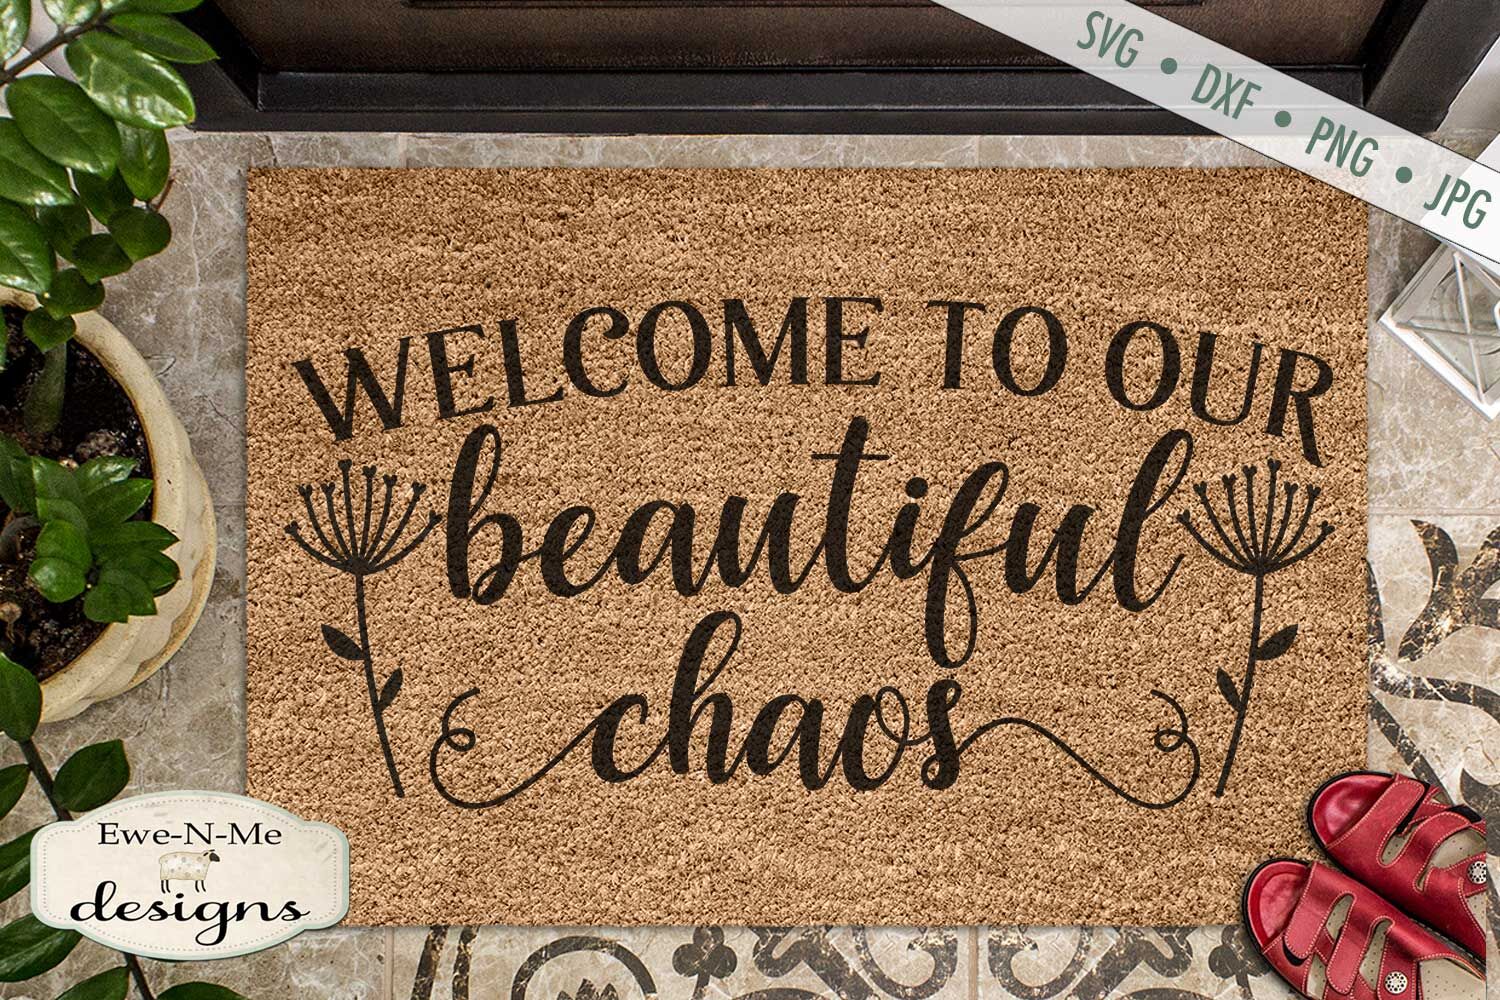 Welcome To Our Beautiful Chaos Doormat Svg By Ewe N Me Designs Thehungryjpeg Com